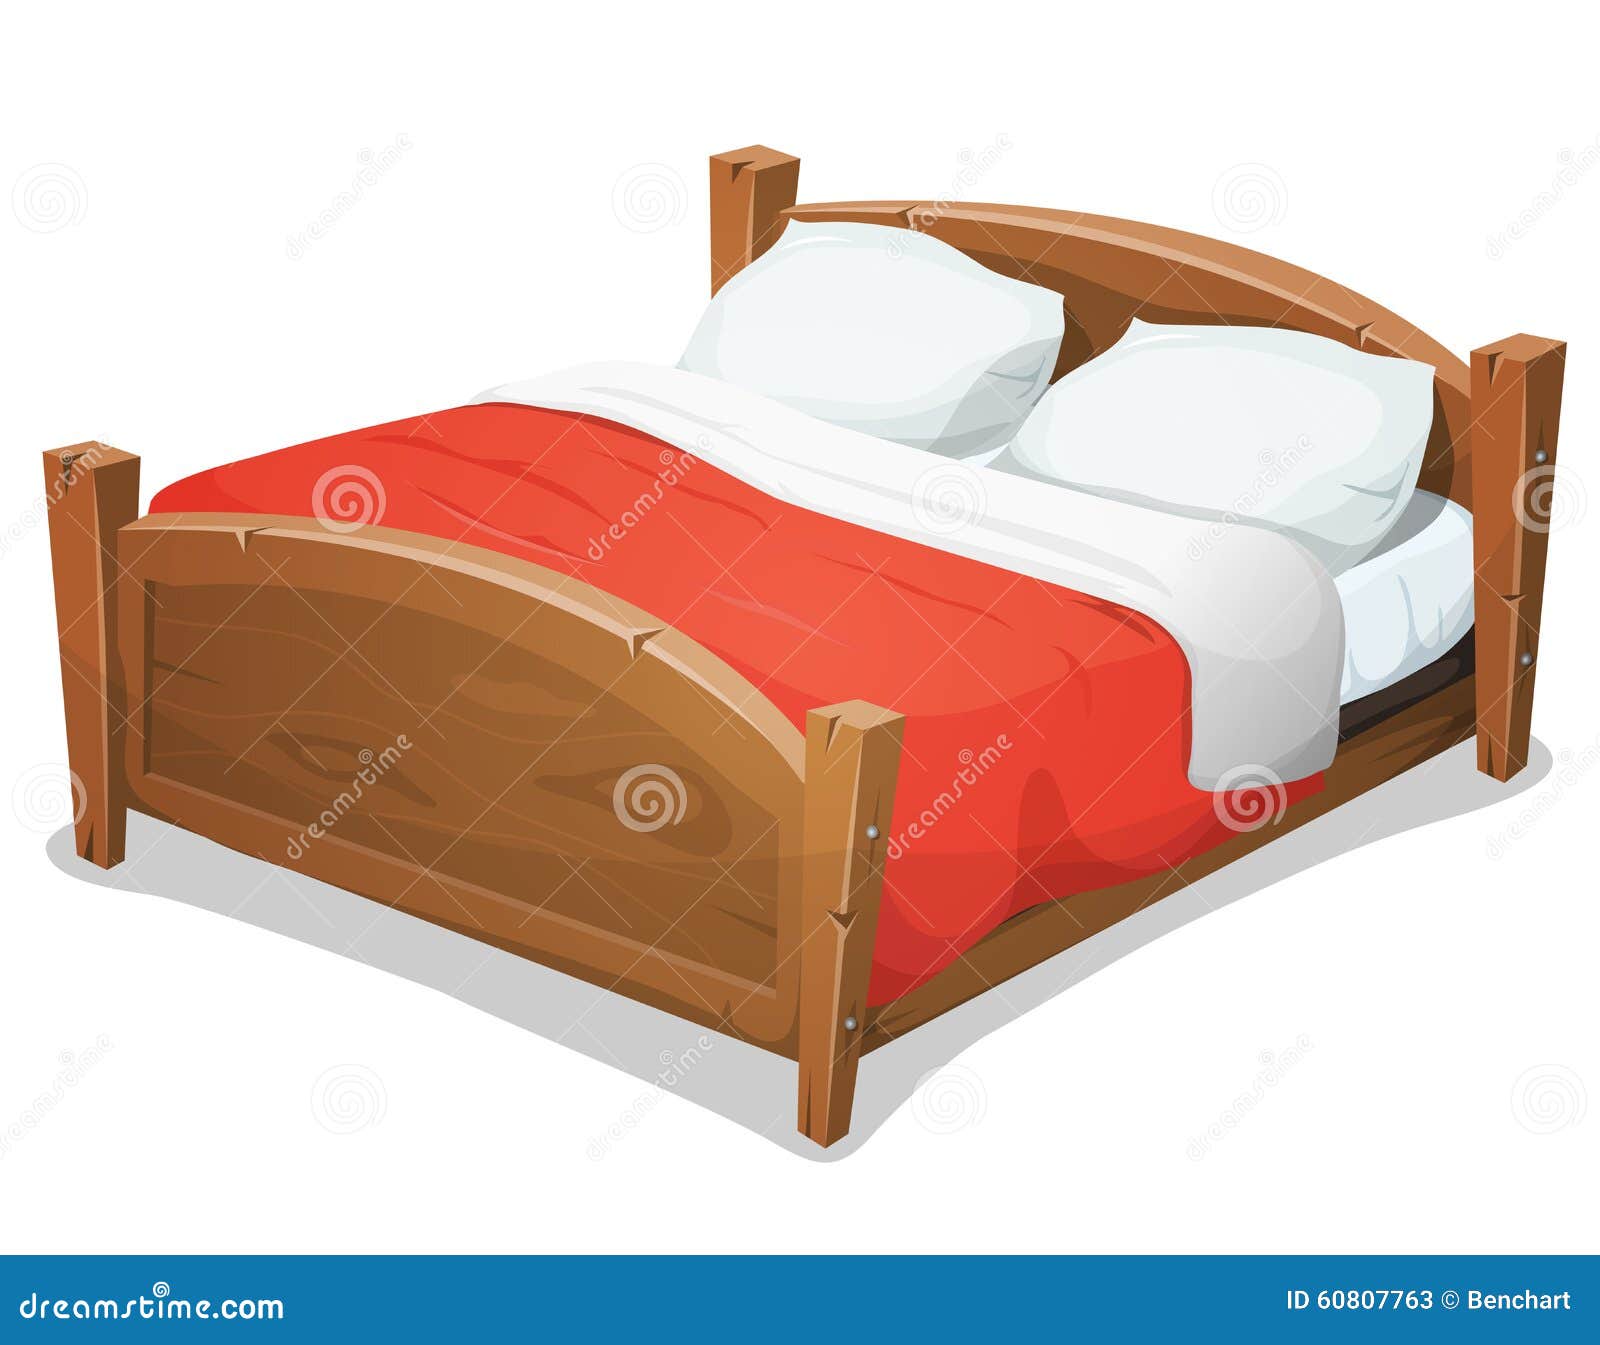 Illustration of a cartoon wooden double big bed for couples with ...